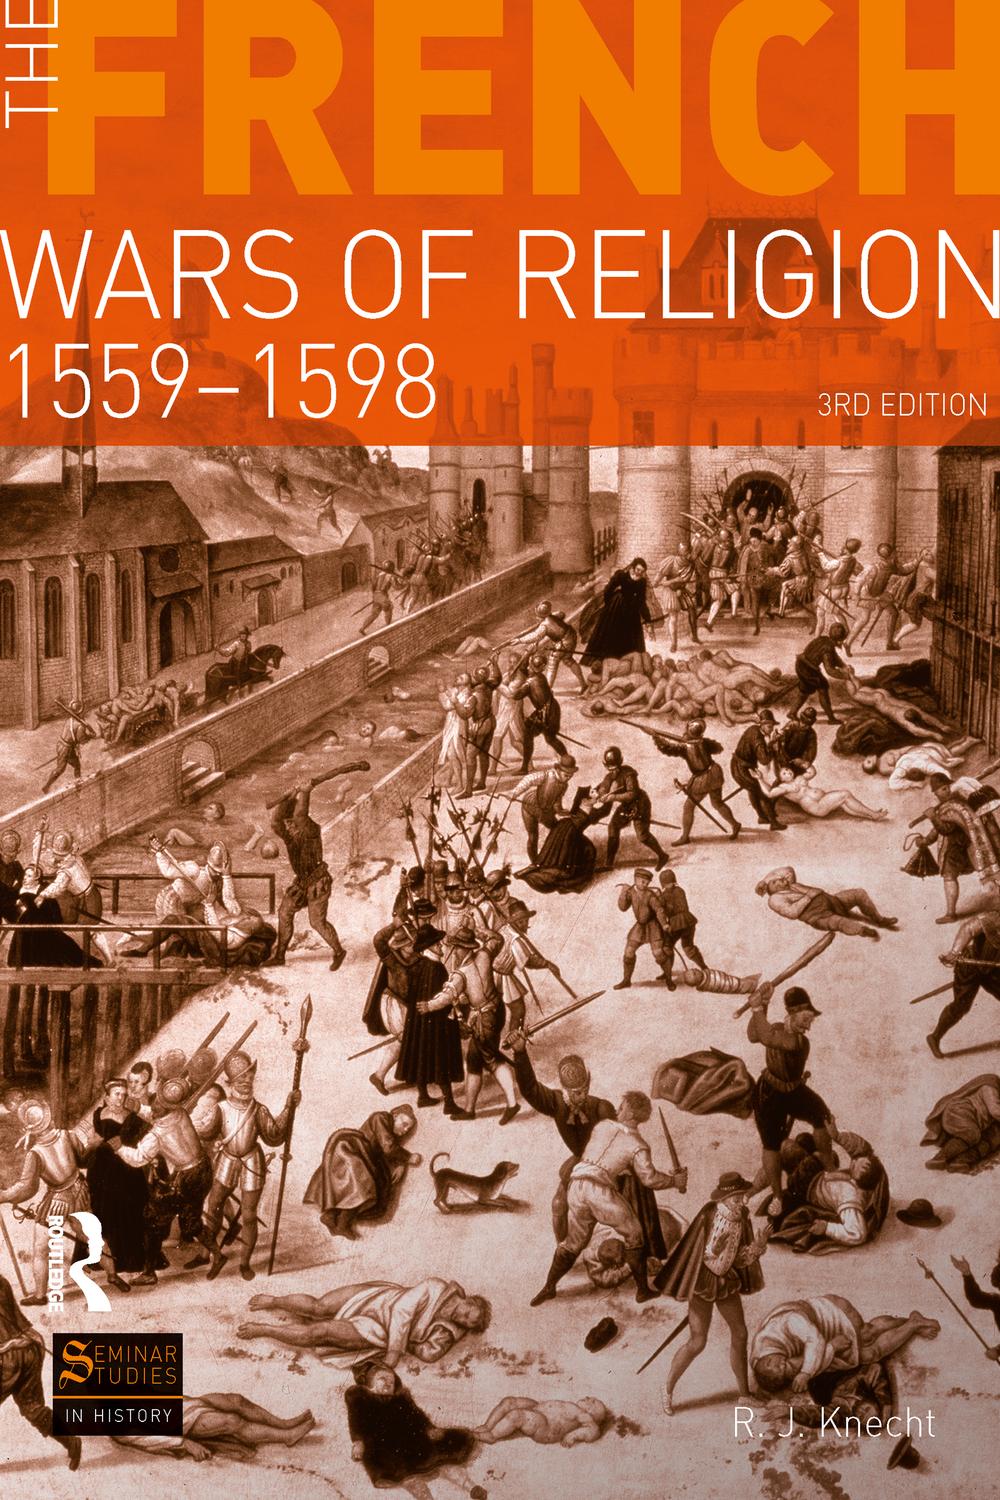 The French Wars of Religion 1559-1598 - R. J. Knecht